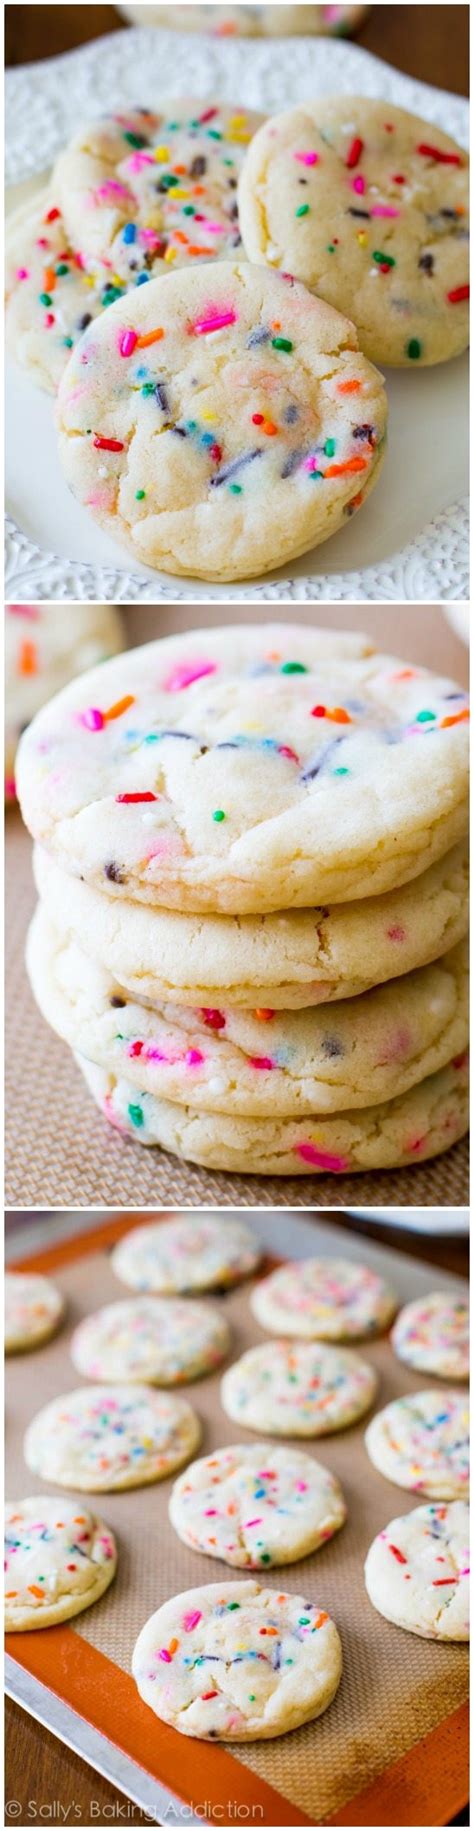 Best Recipes For Sallys Baking Addiction Sugar Cookies Easy Recipes